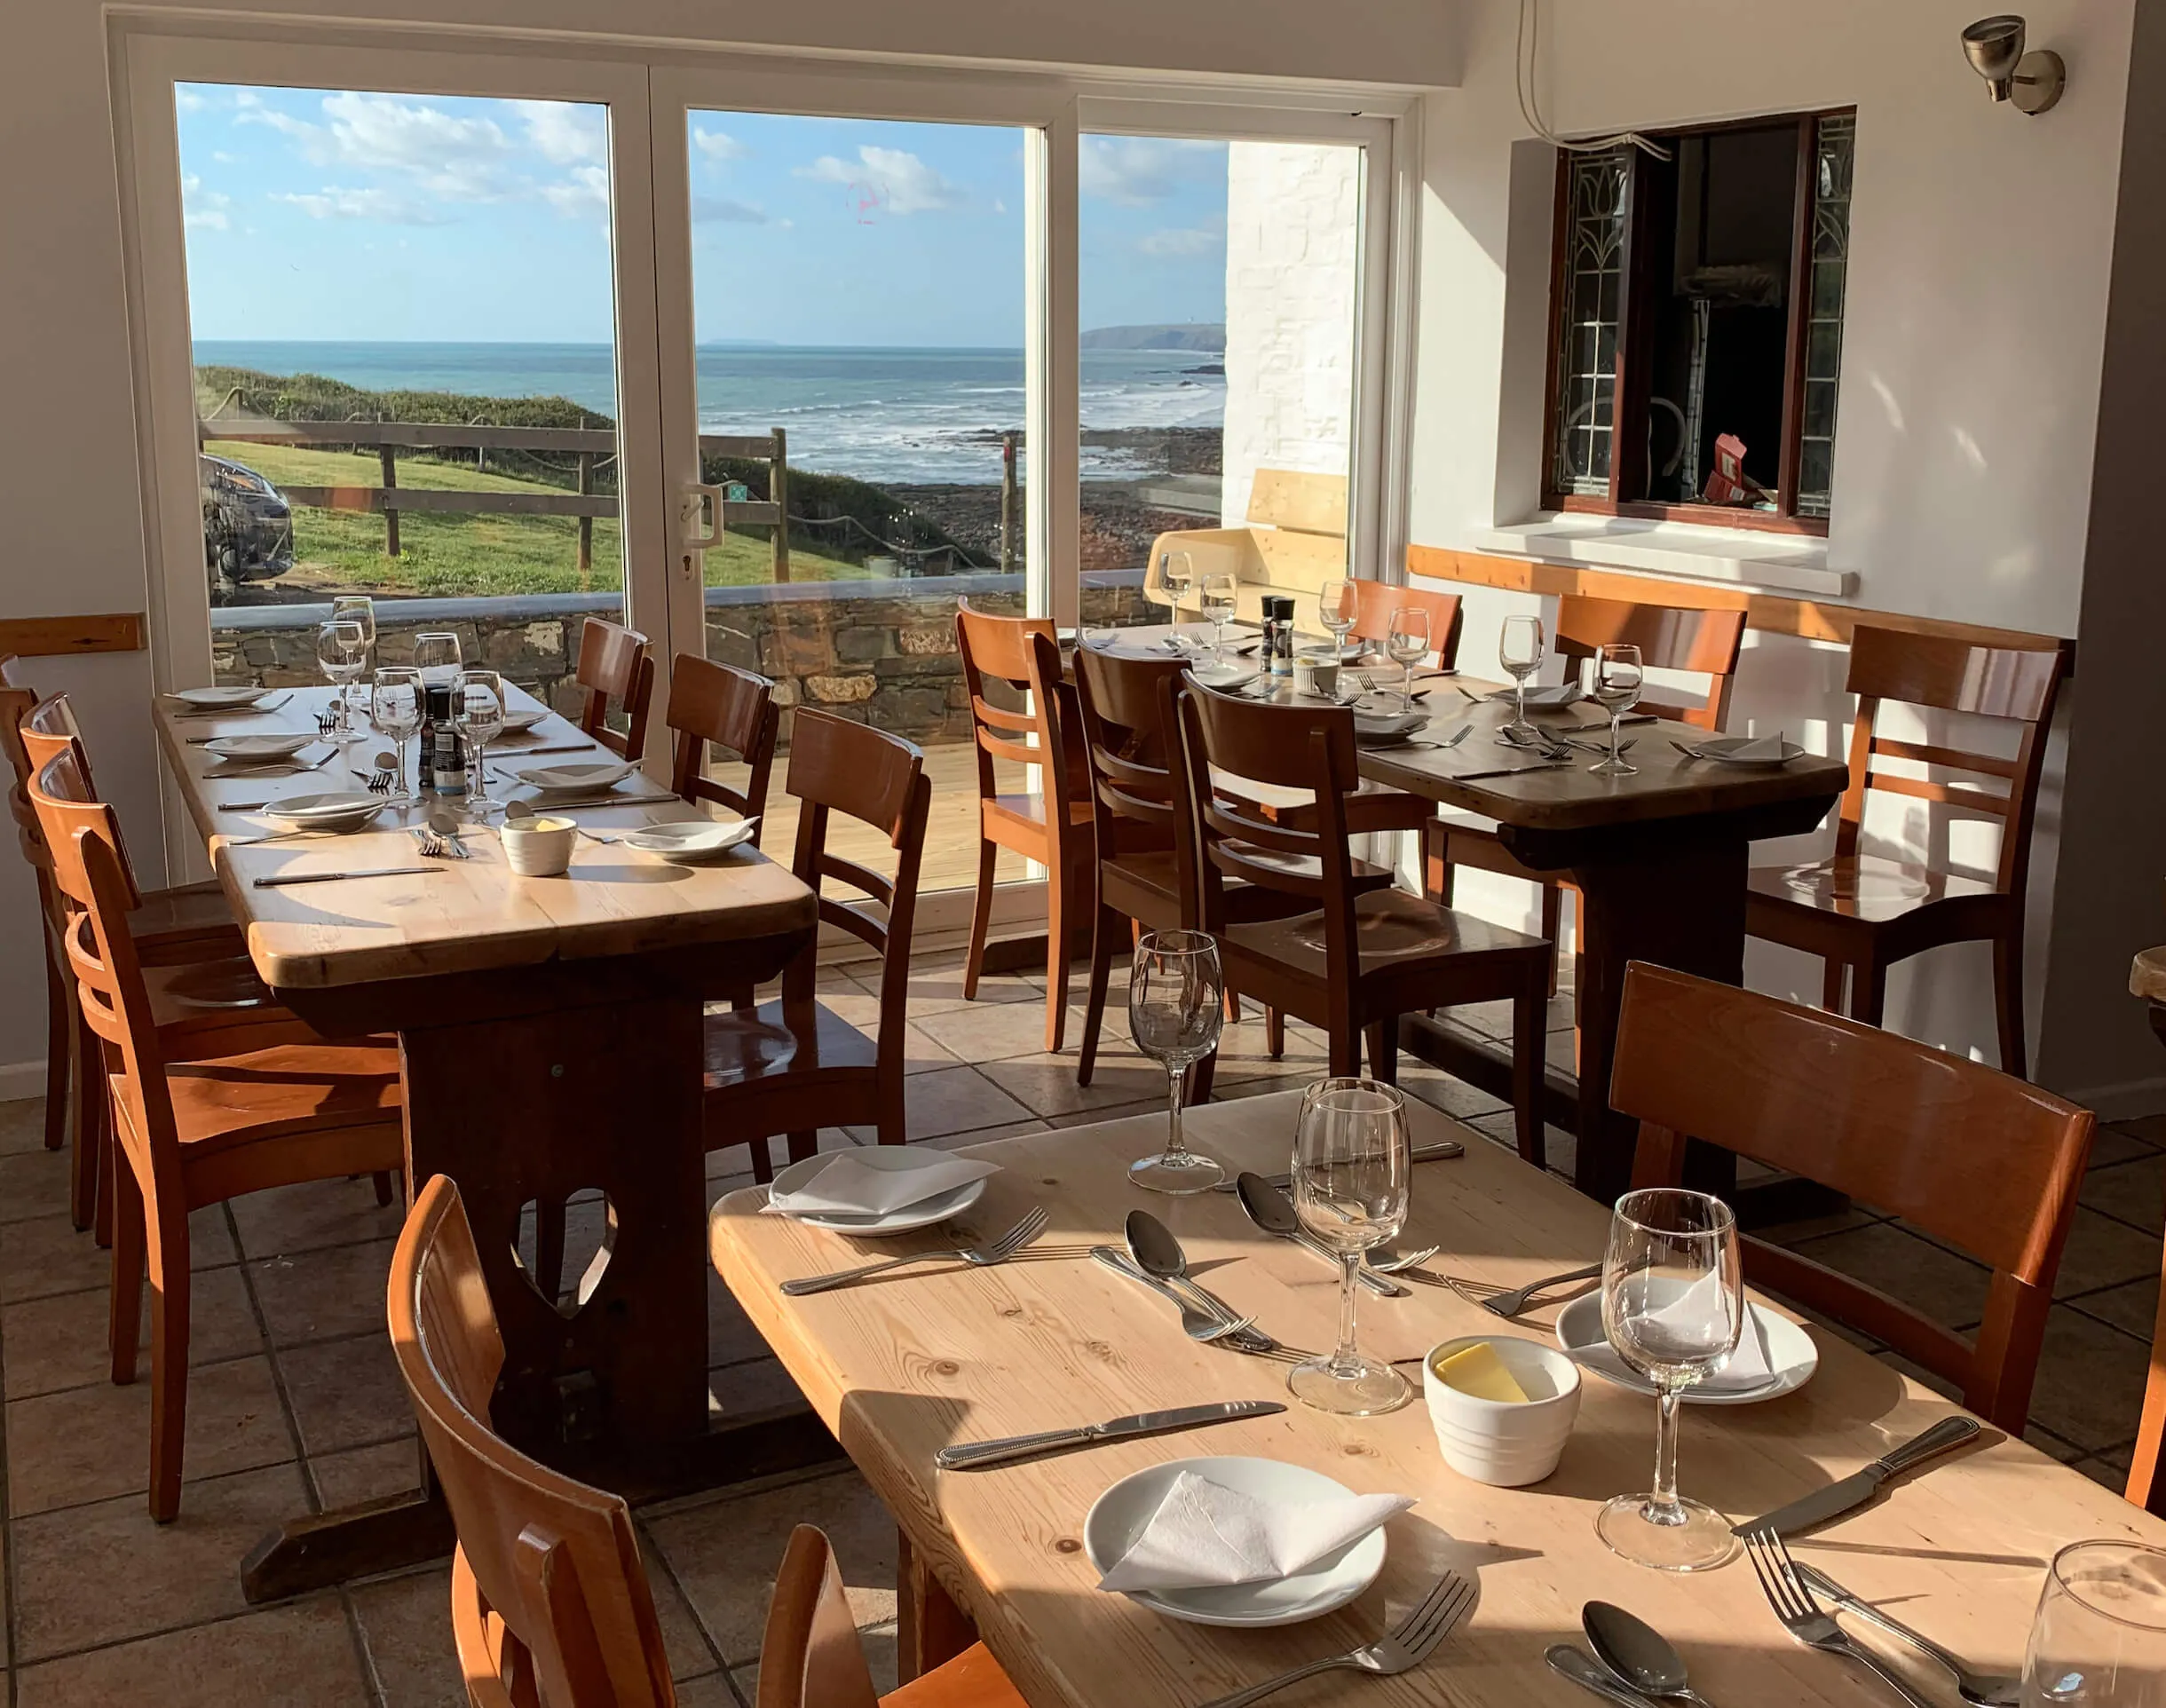 dining room laid up for a meal with the view of the sea, eat as a family on holiday in Bude